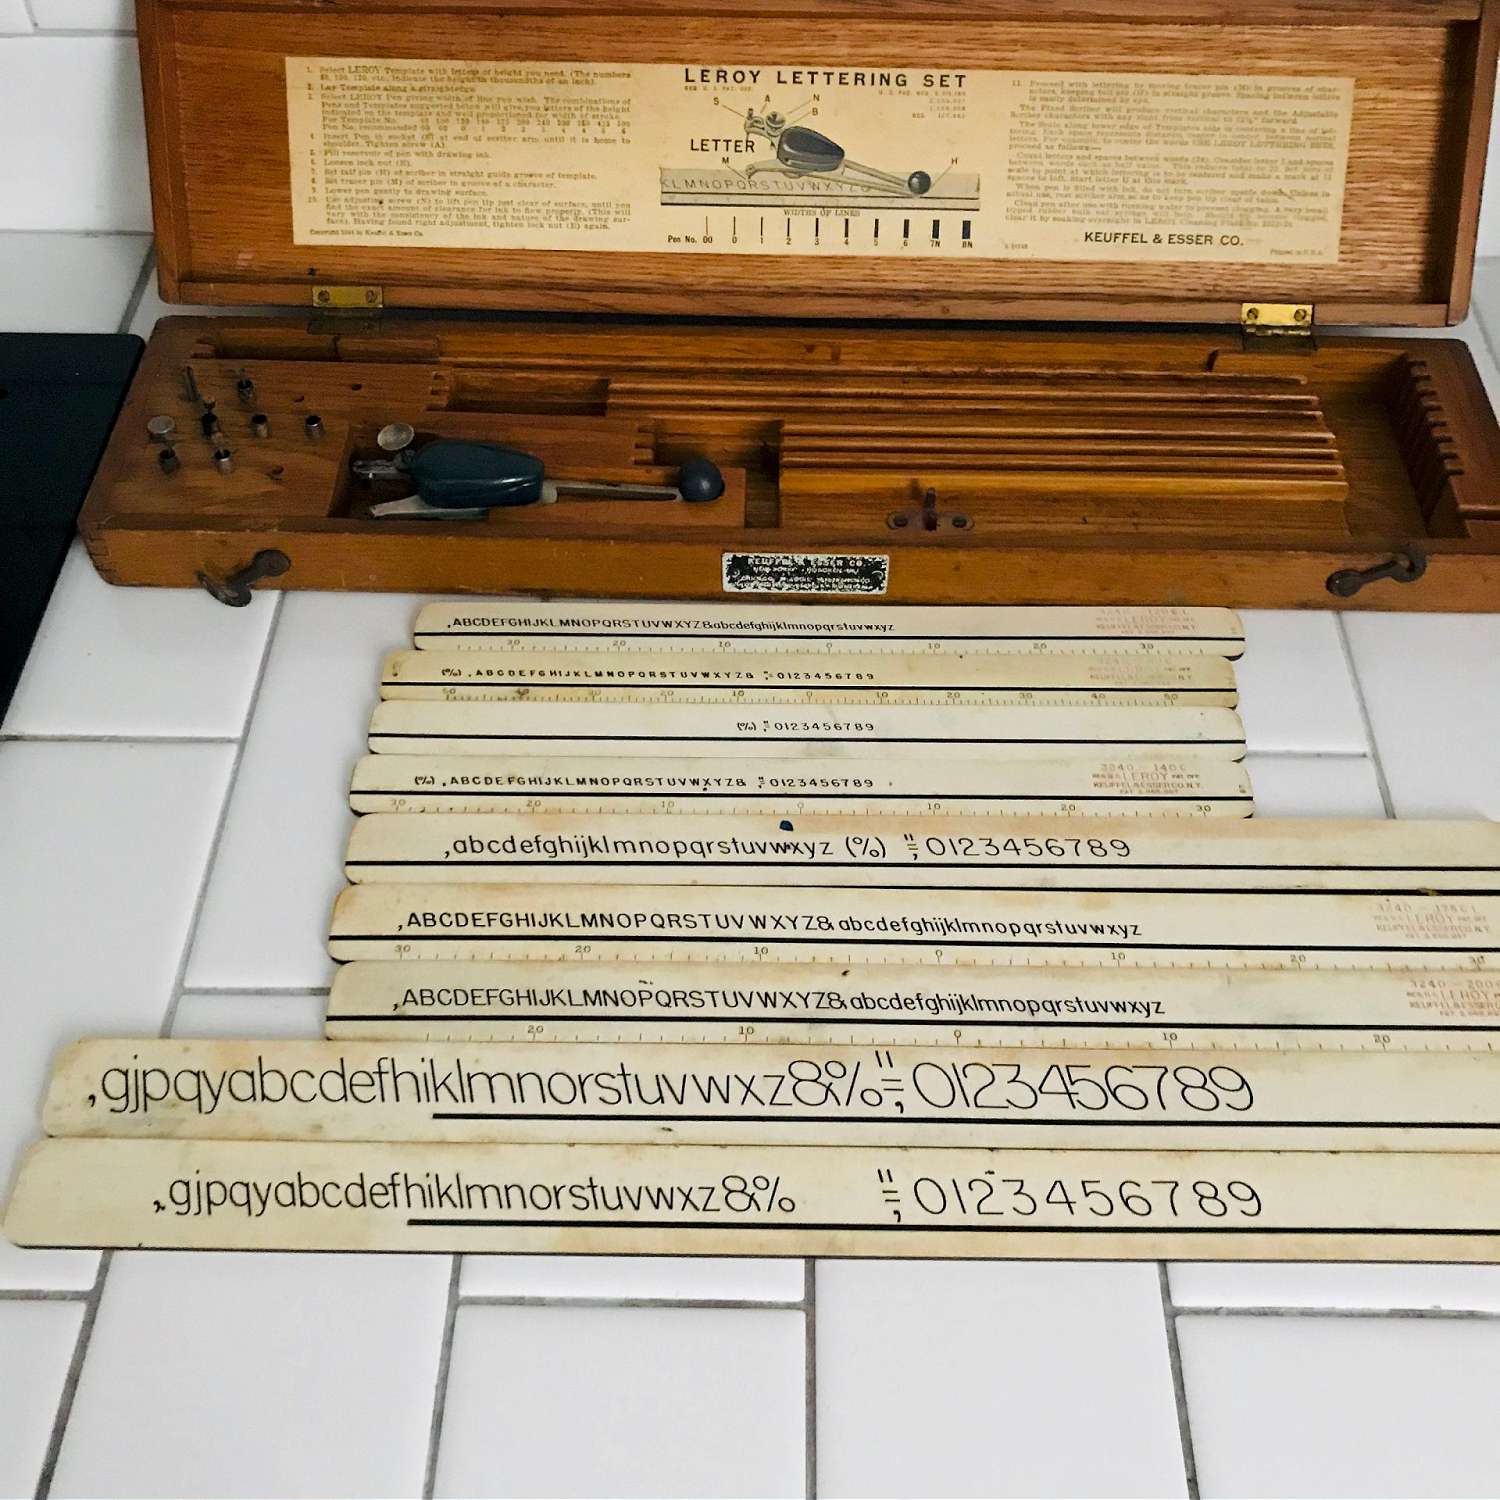 Vintage Lettering Kit Leroy Lettering Set Keuffel & Esser New York 1944  template farmhouse office collectible display – Carol's True Vintage and  Antiques